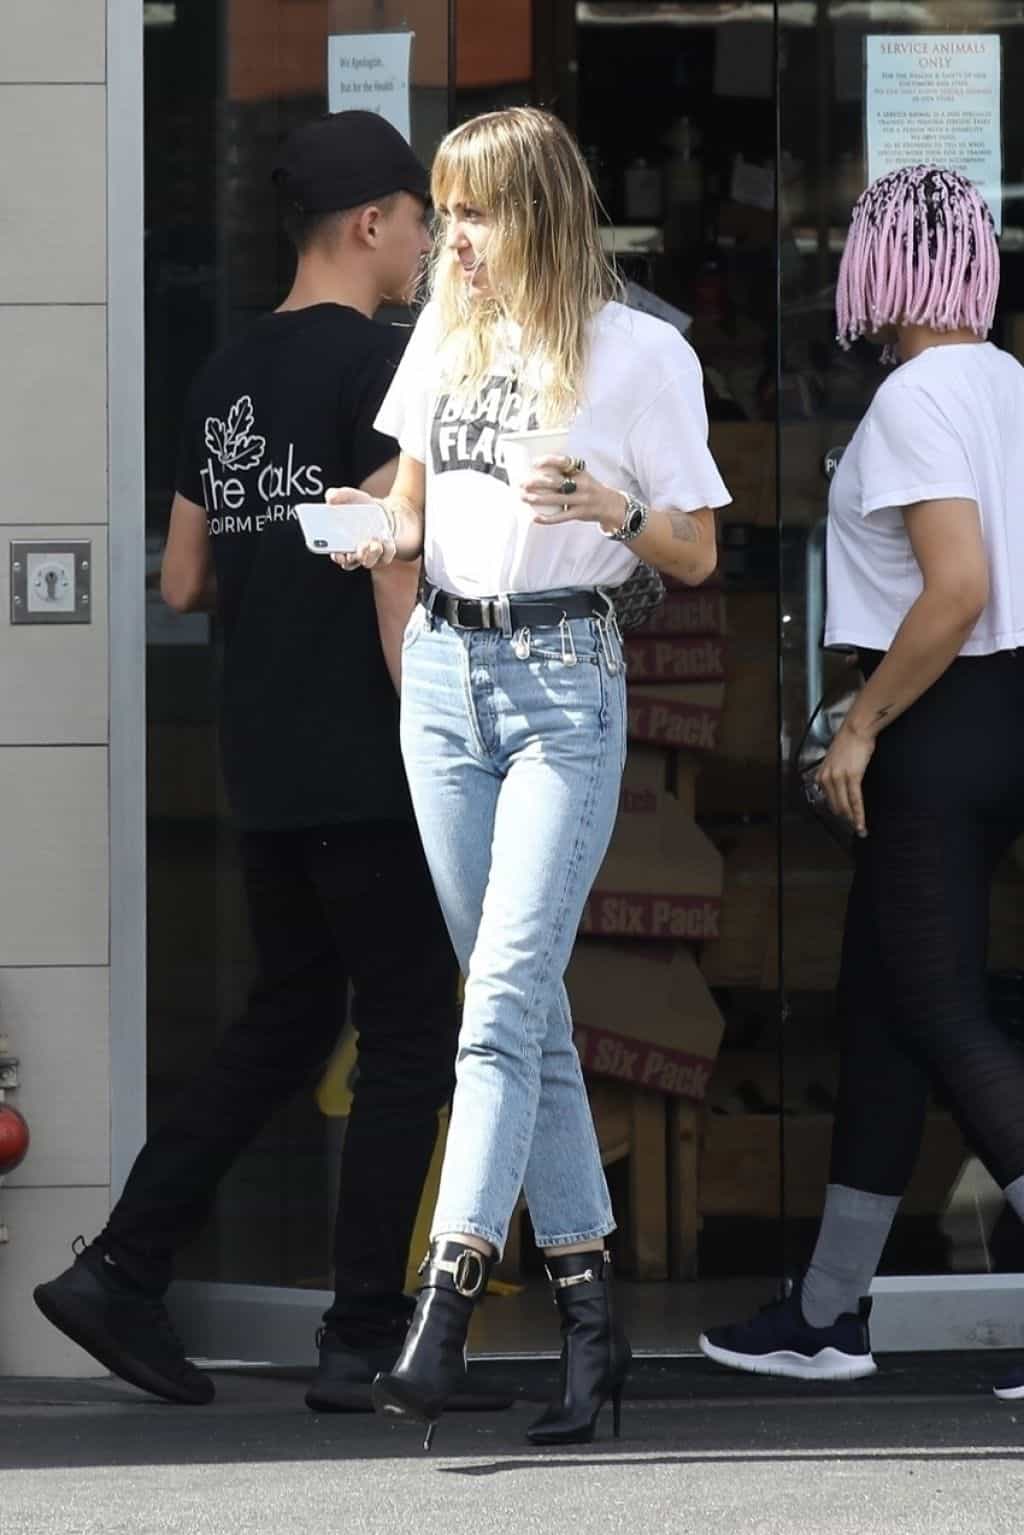 Miley Cyrus Models a Rock 'n' Roll Look for Lunch in LA with Her Ex